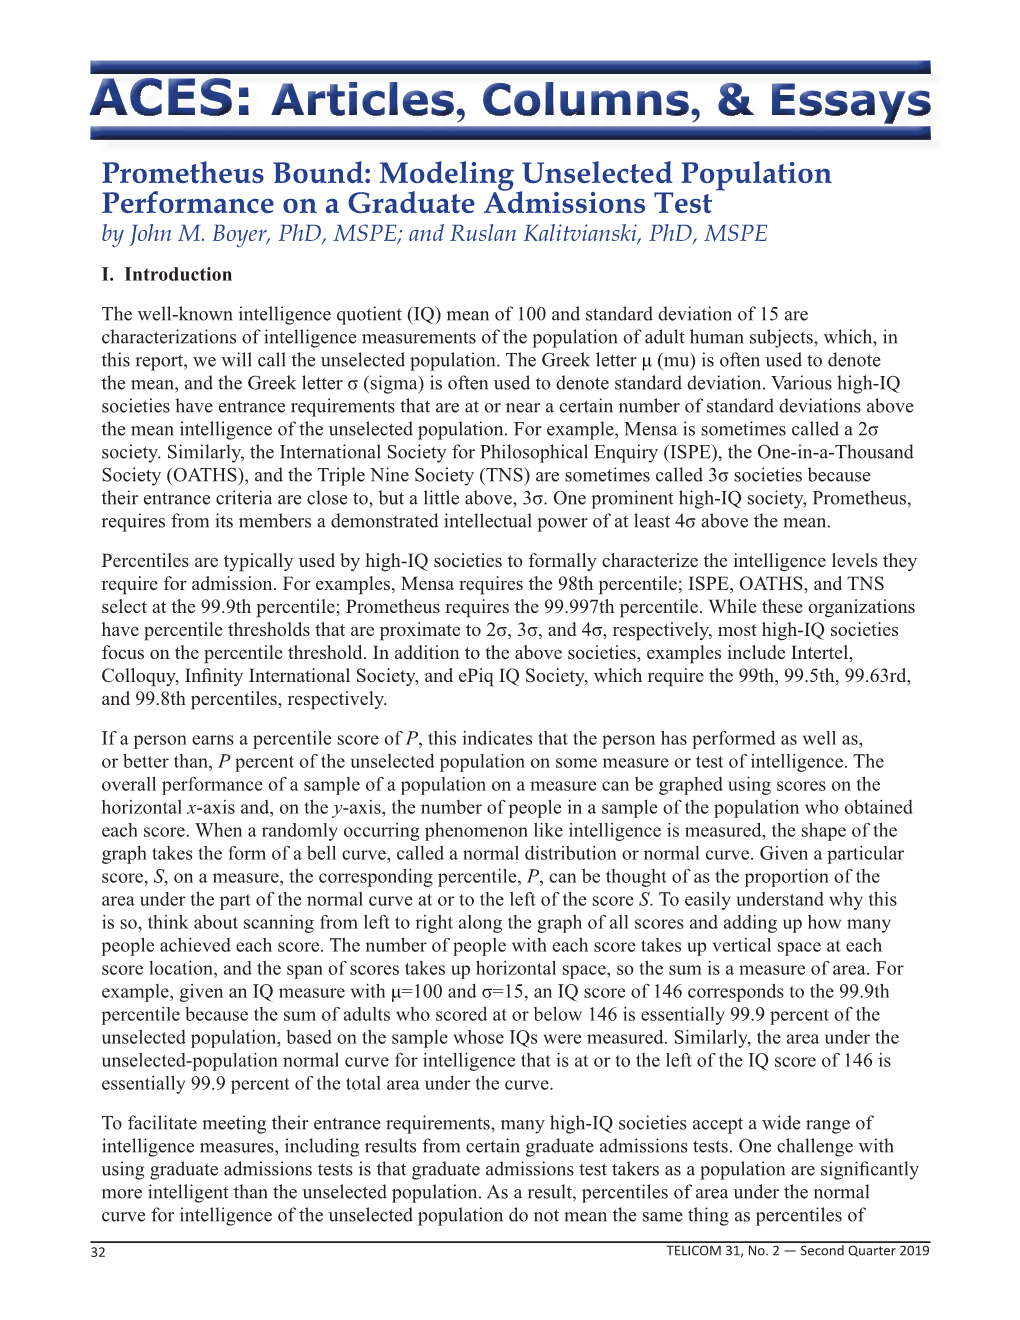 ARTICLE: “Prometheus Bound: Modeling Unselected Population